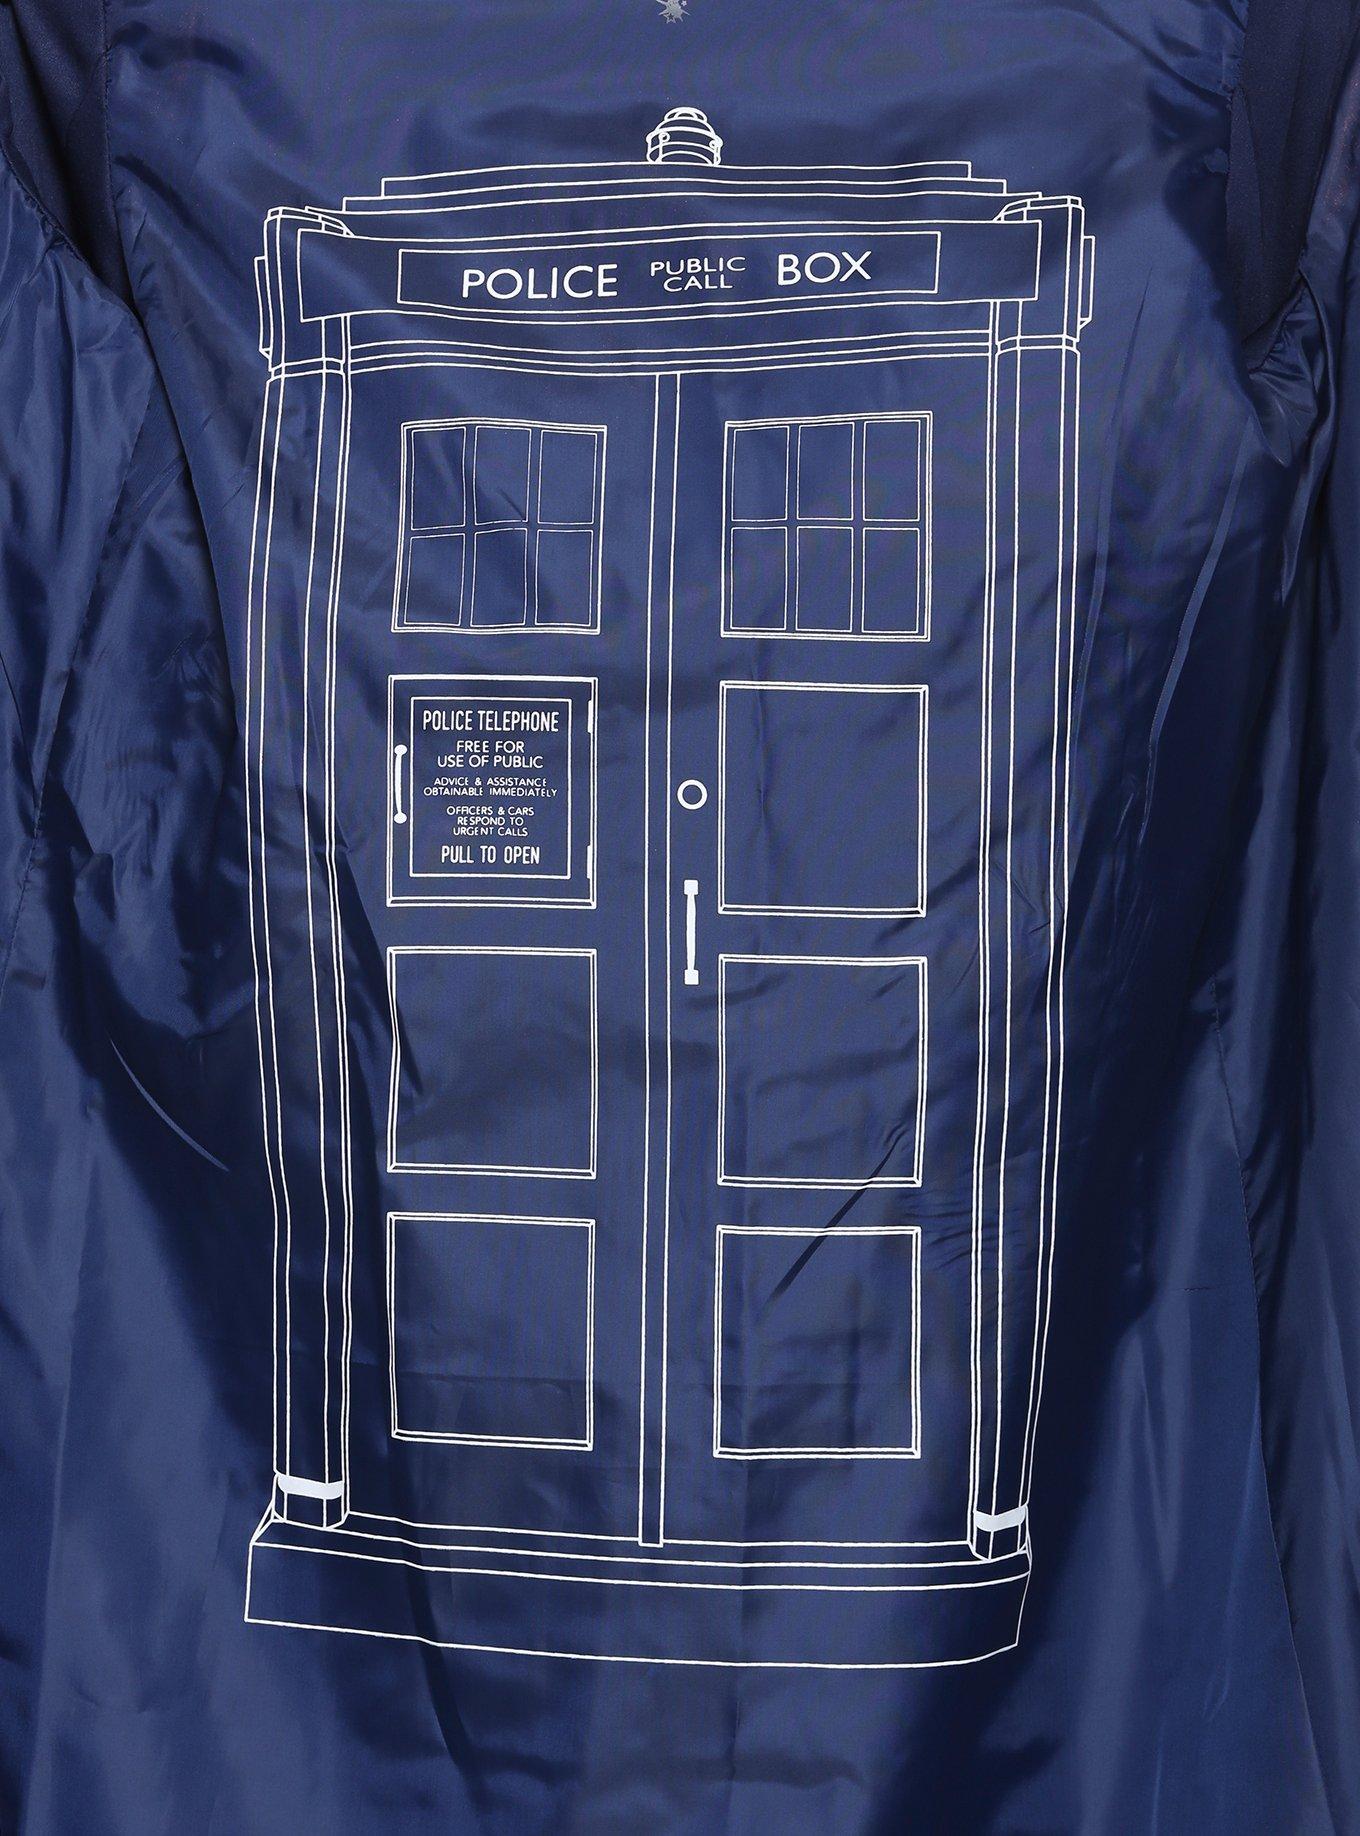 Her Universe Doctor Who Thirteenth Doctor Trench Coat, , alternate